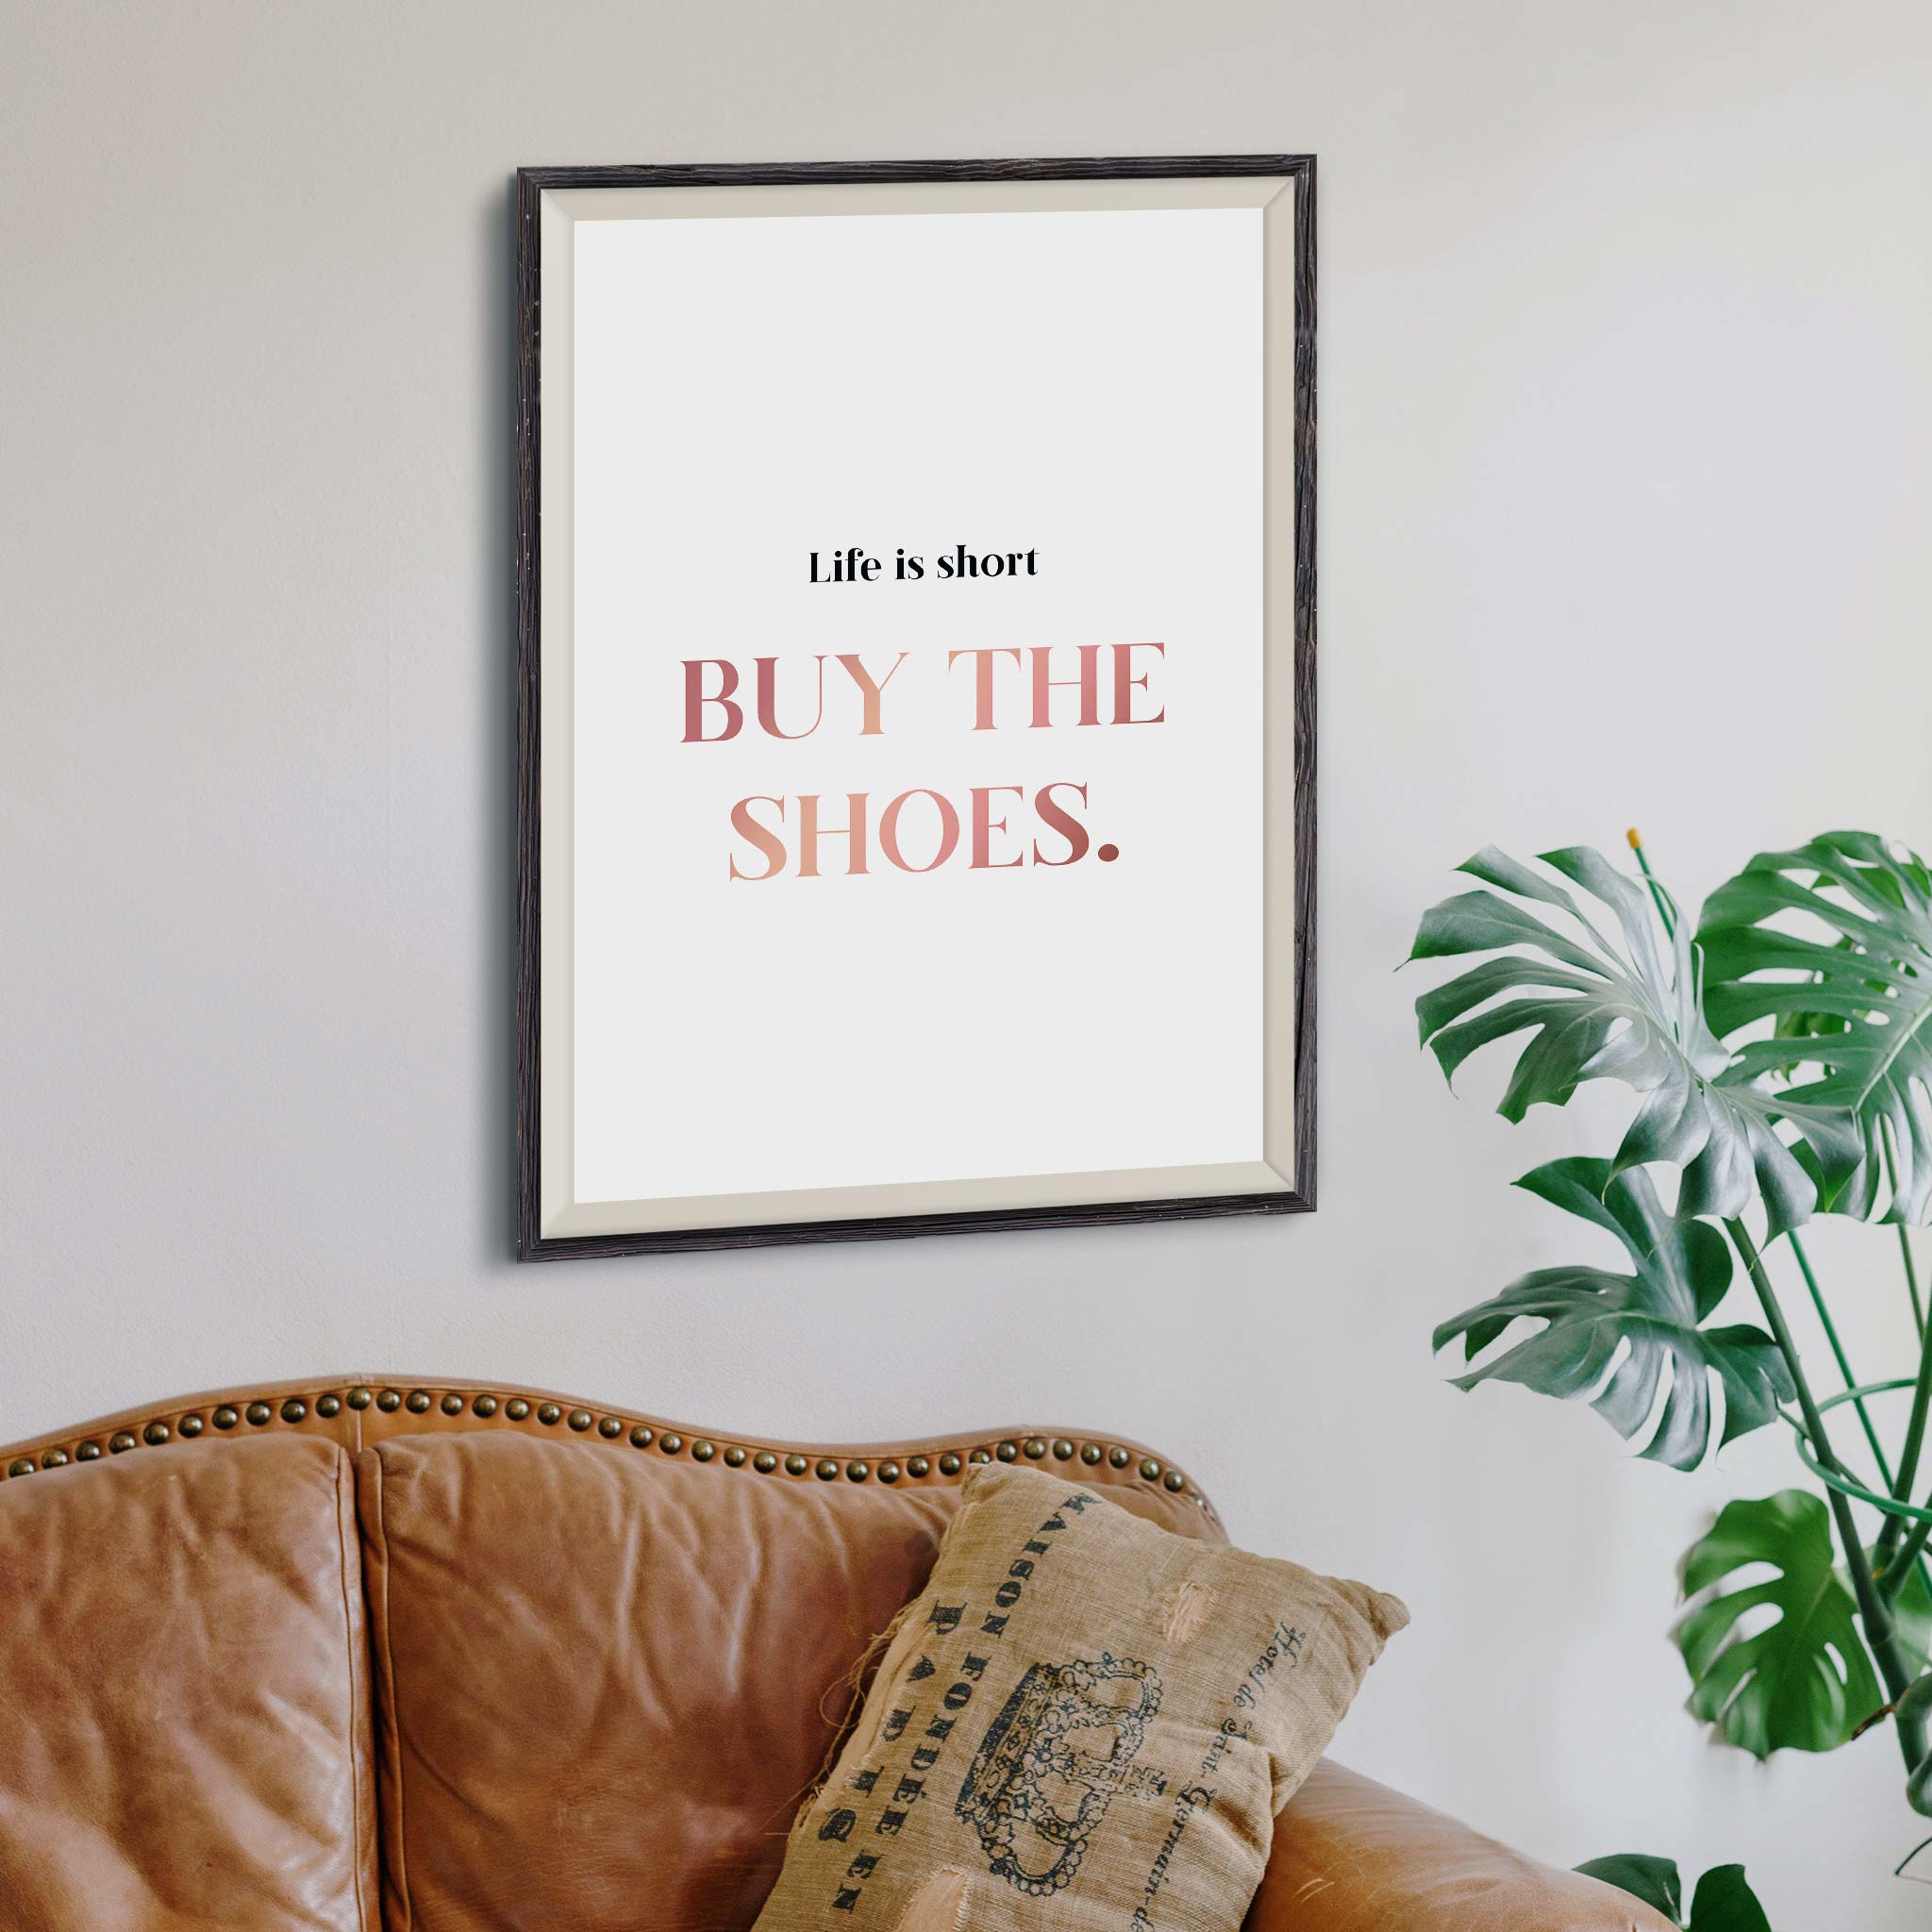 Life is short buy the shoes